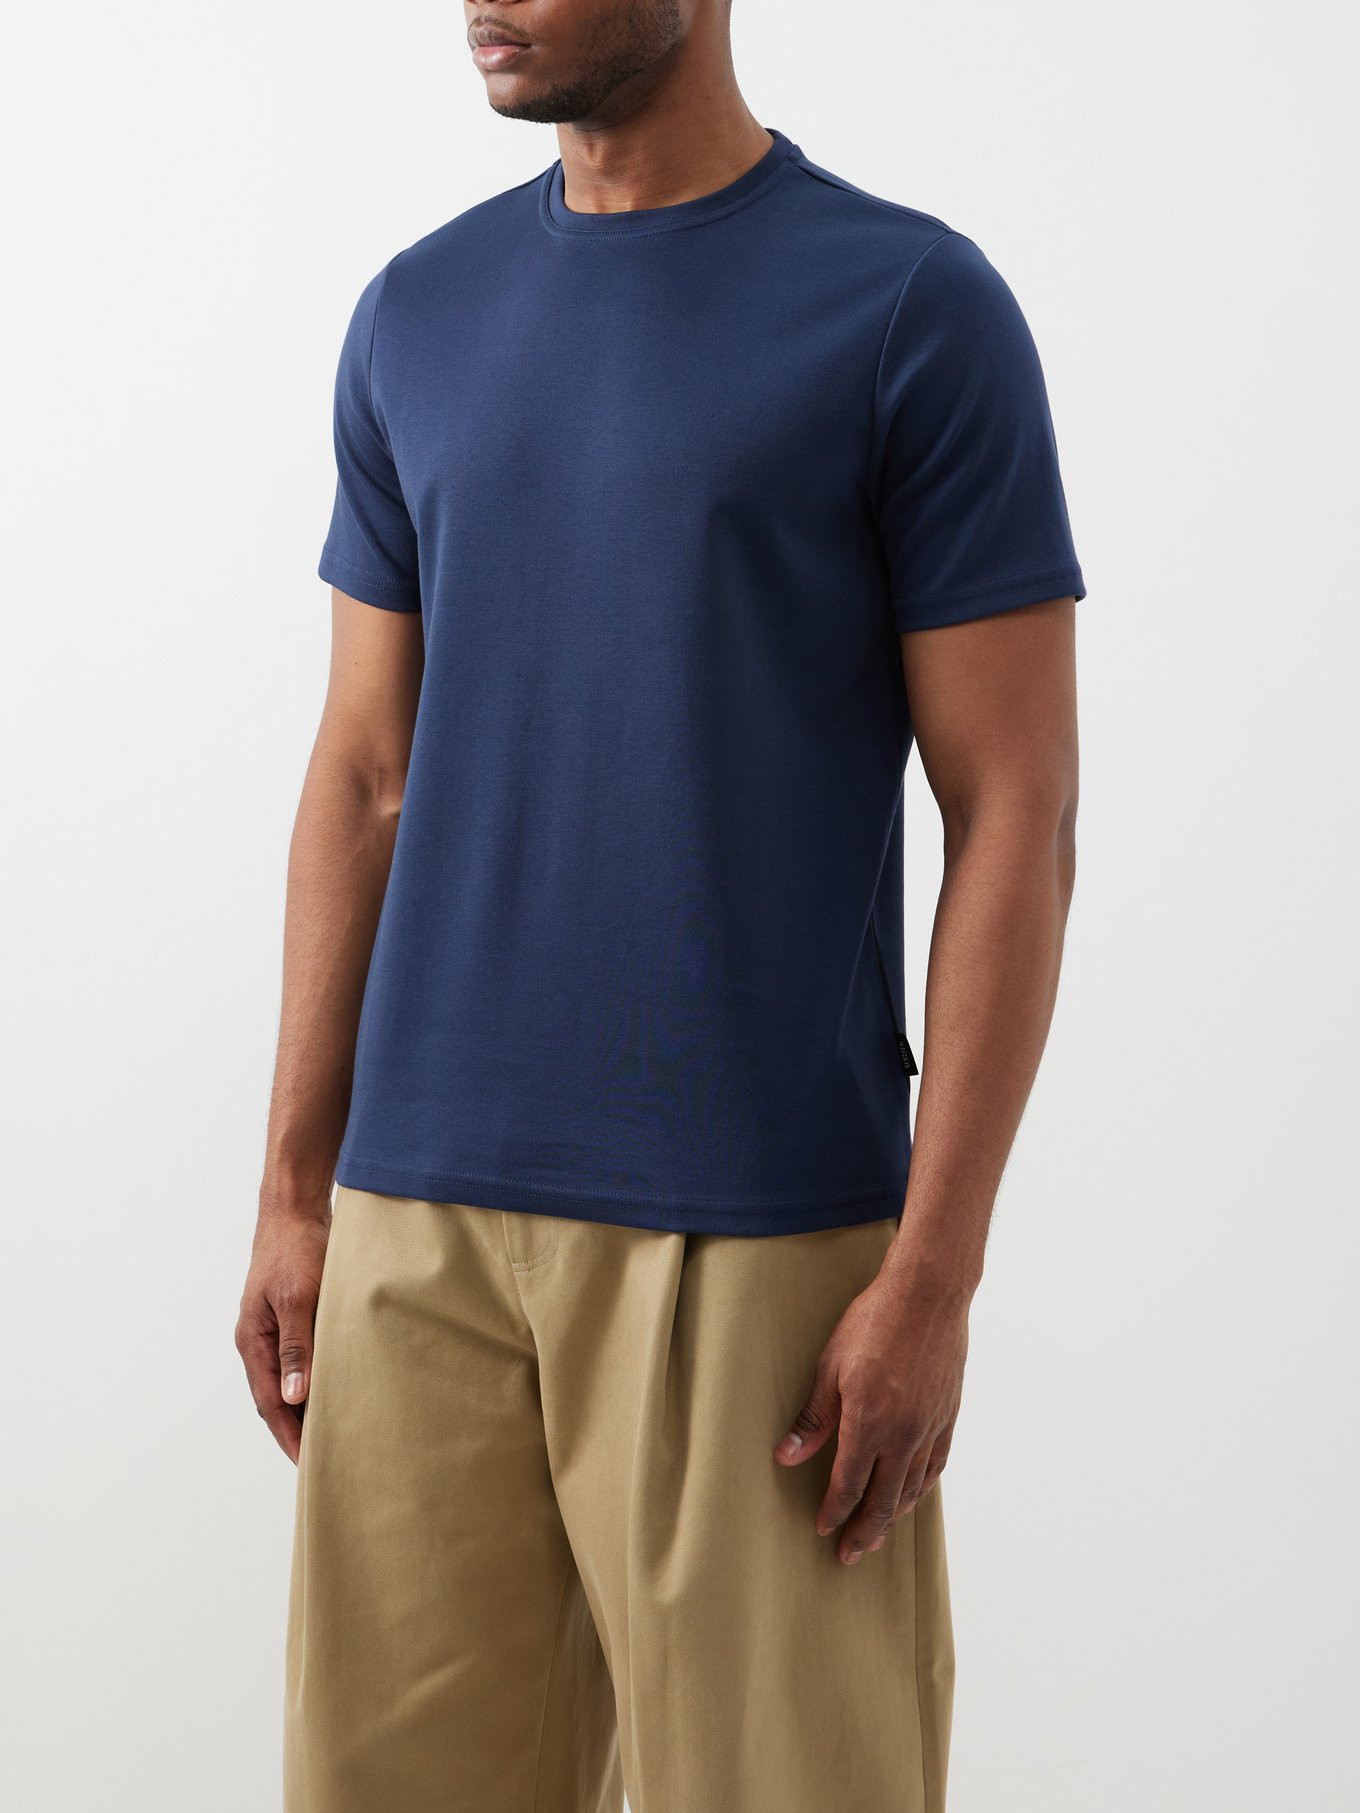 Spencer Navy T-shirt jersey Heavy organic-cotton | Oliver | MATCHES UK